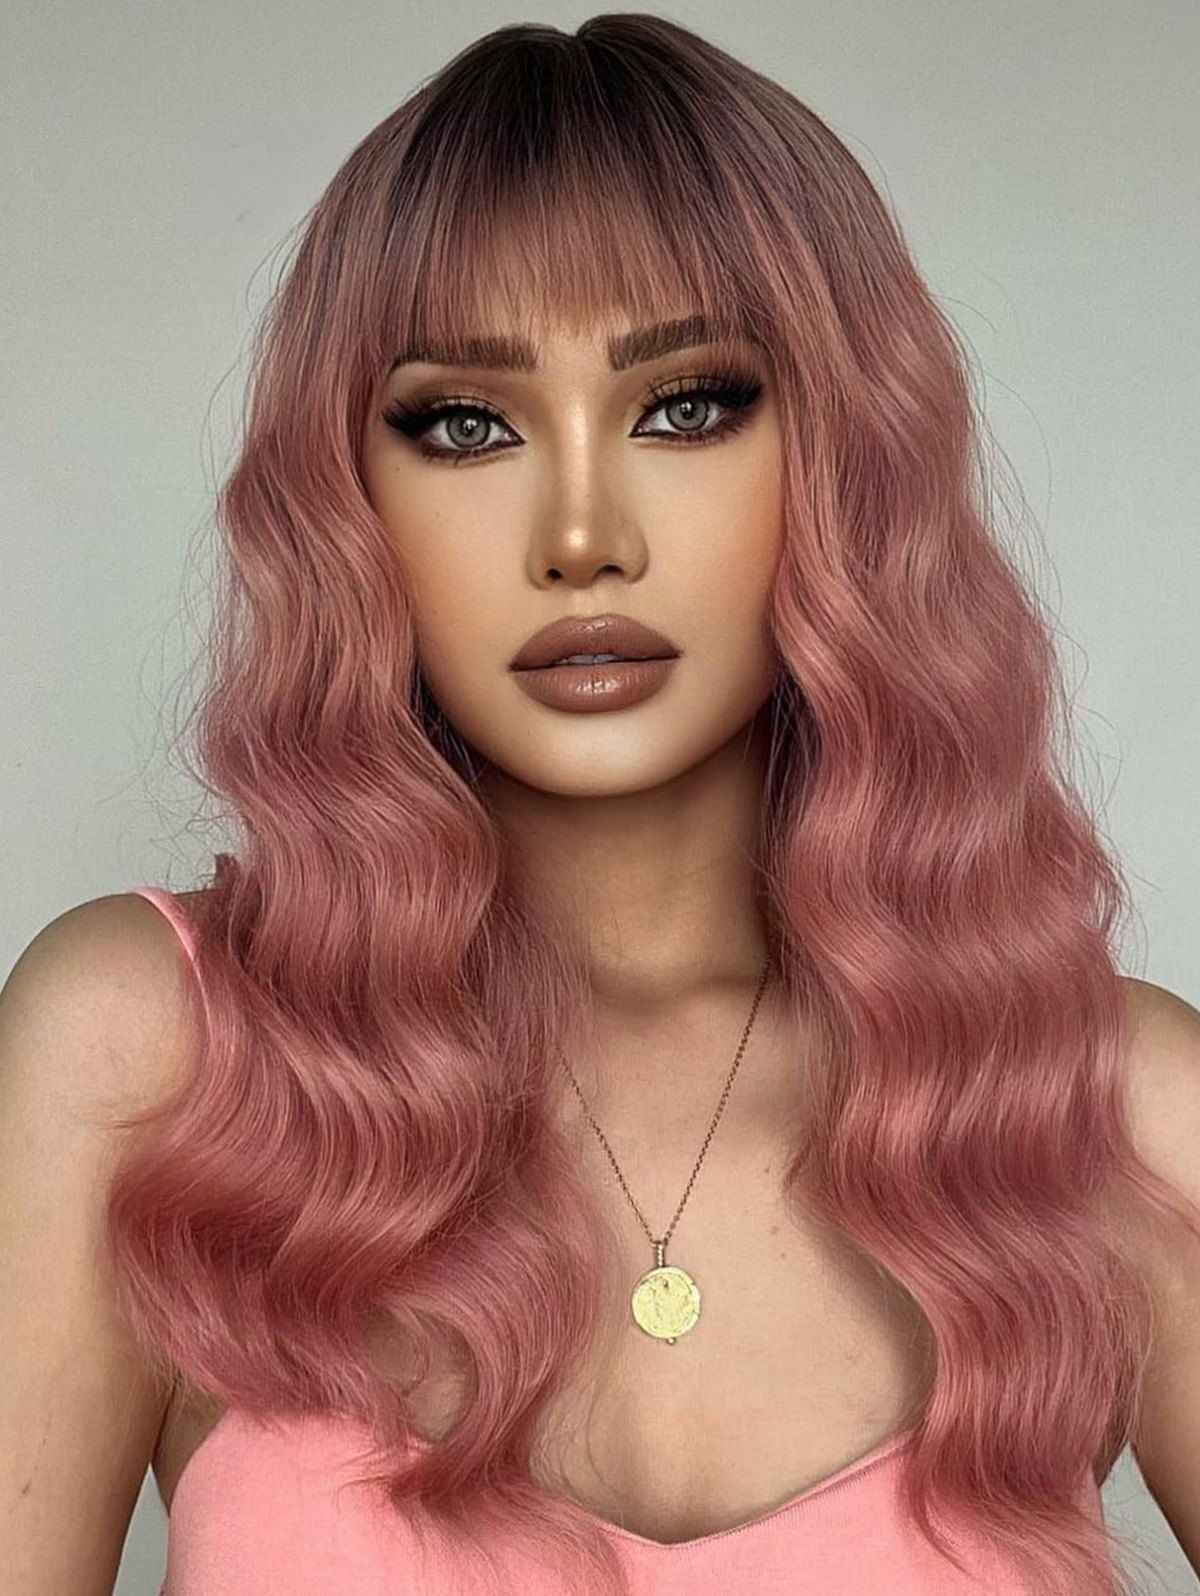 Full Bang Wavy Ombre Capless Long Synthetic Wig - PINK ROSE 24INCH